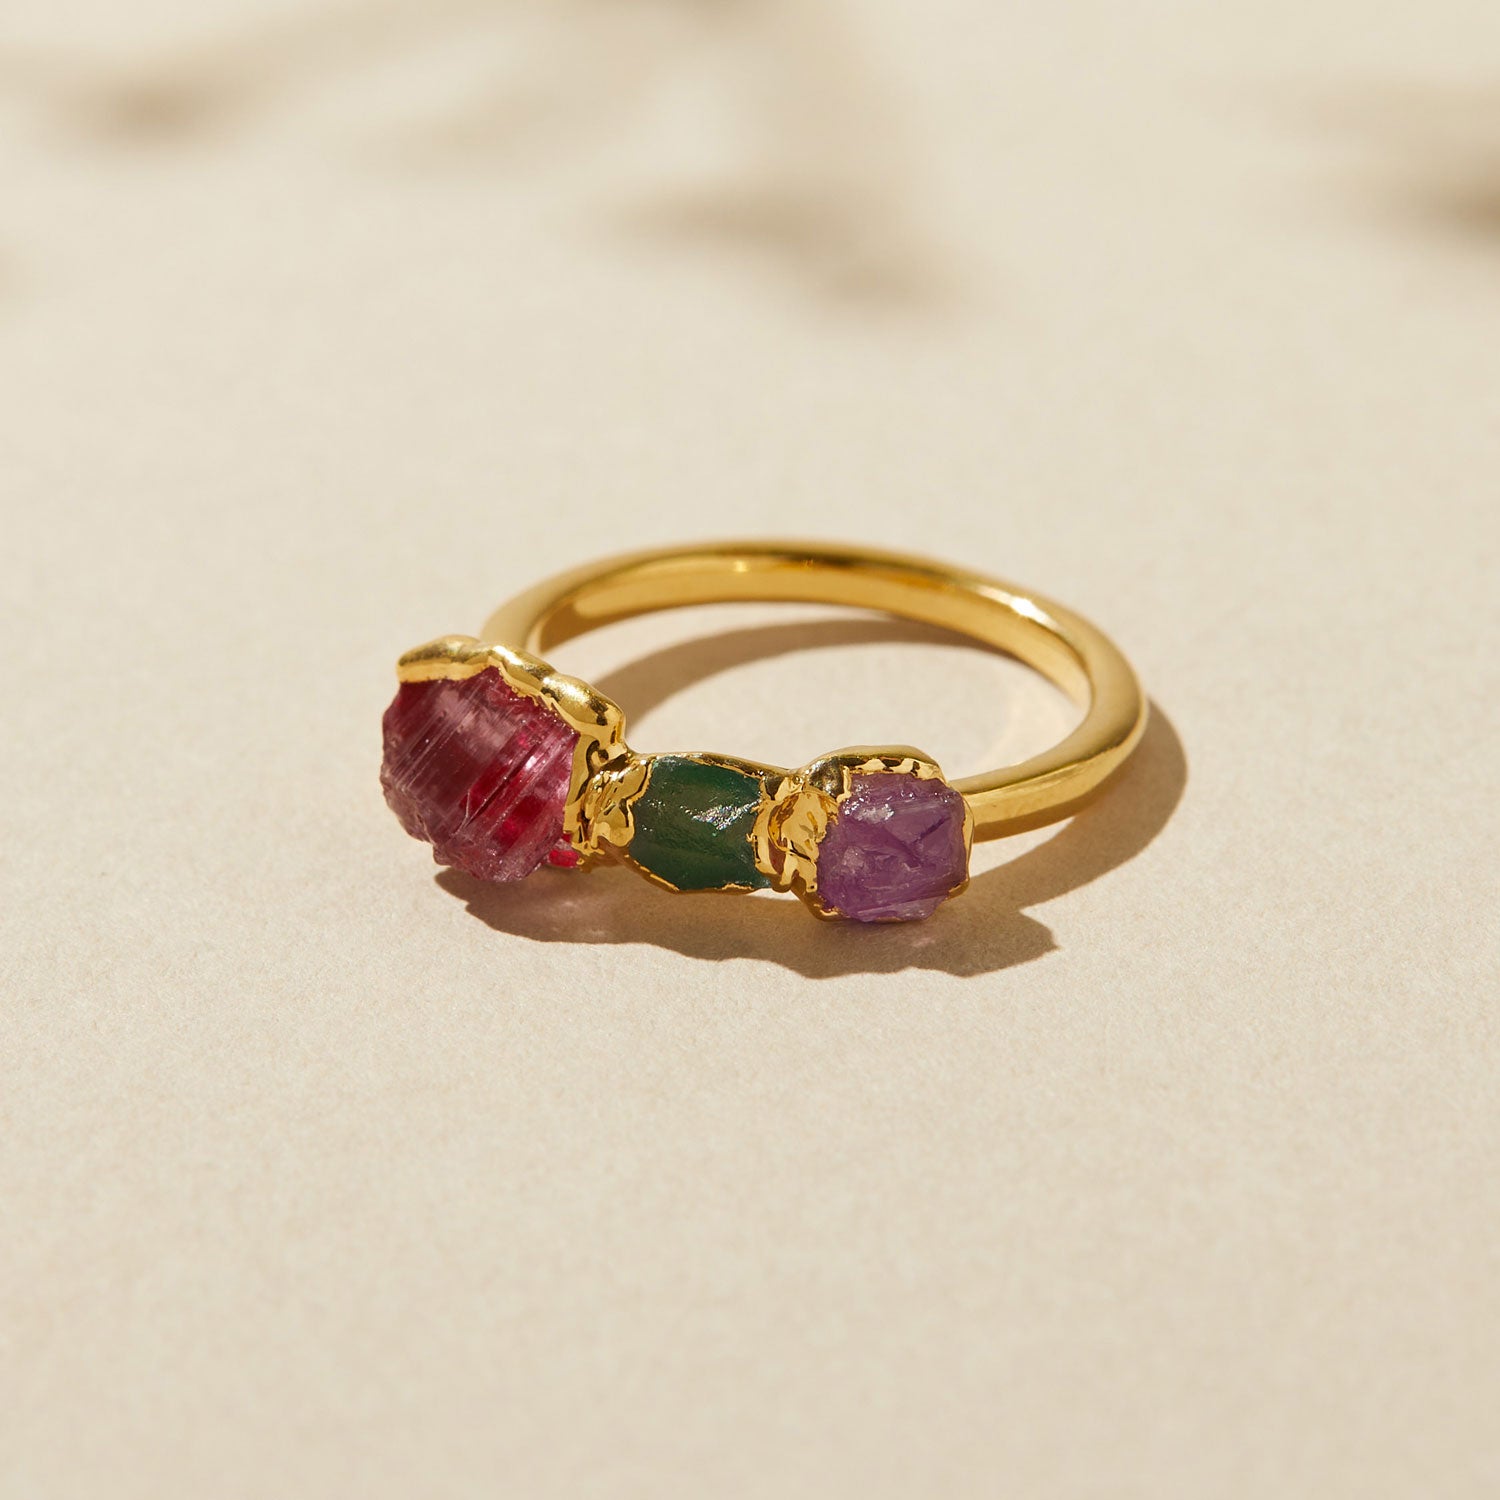 Tourmaline Birthstone Ring for October